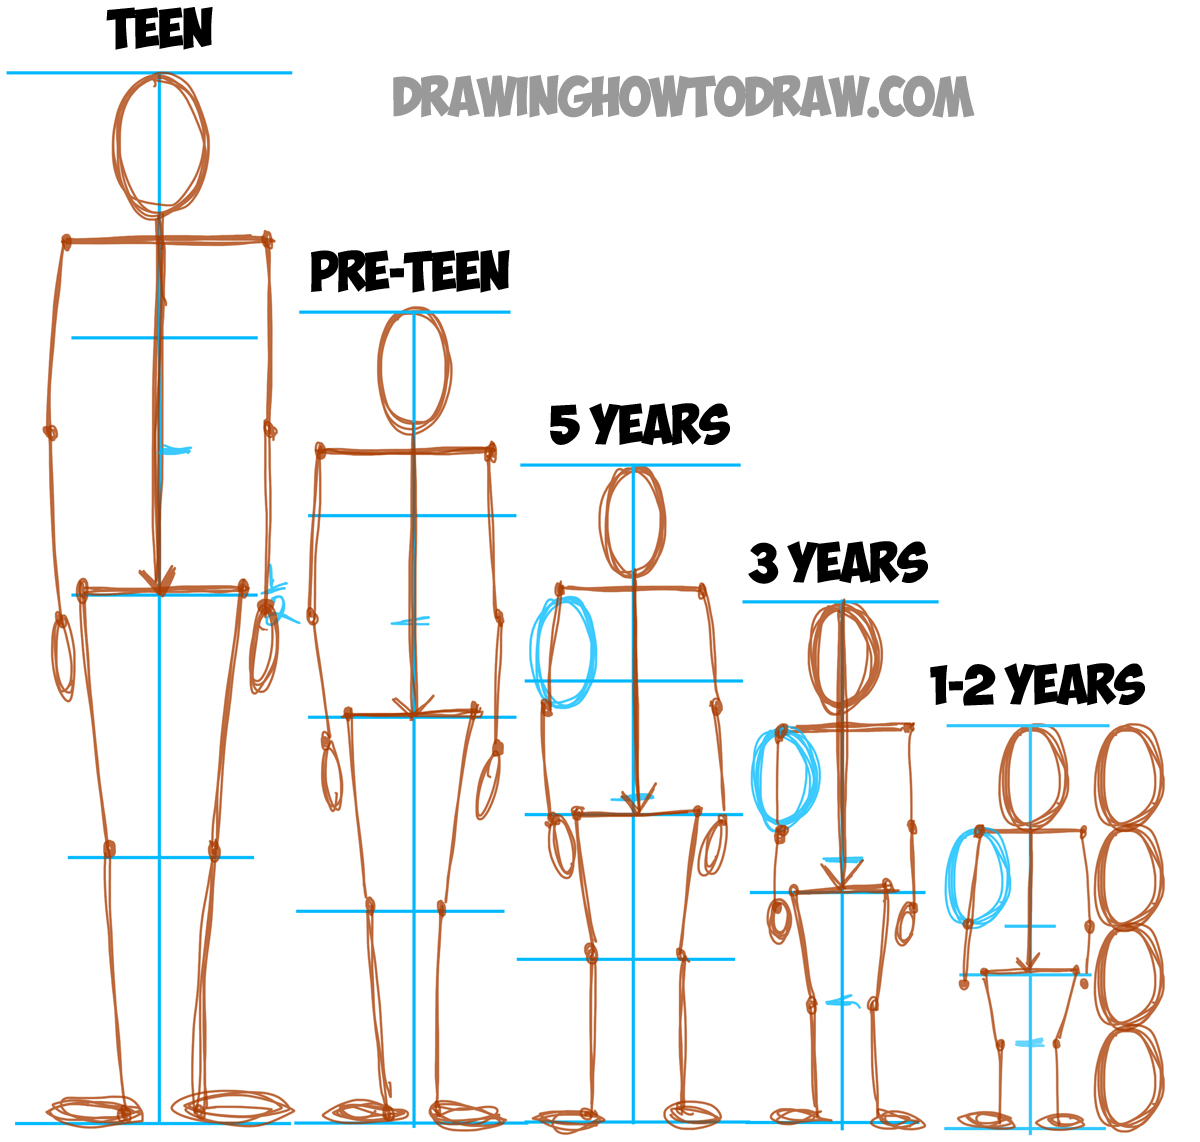 Now Lets Show You the Human Proportions of Different Age Groups